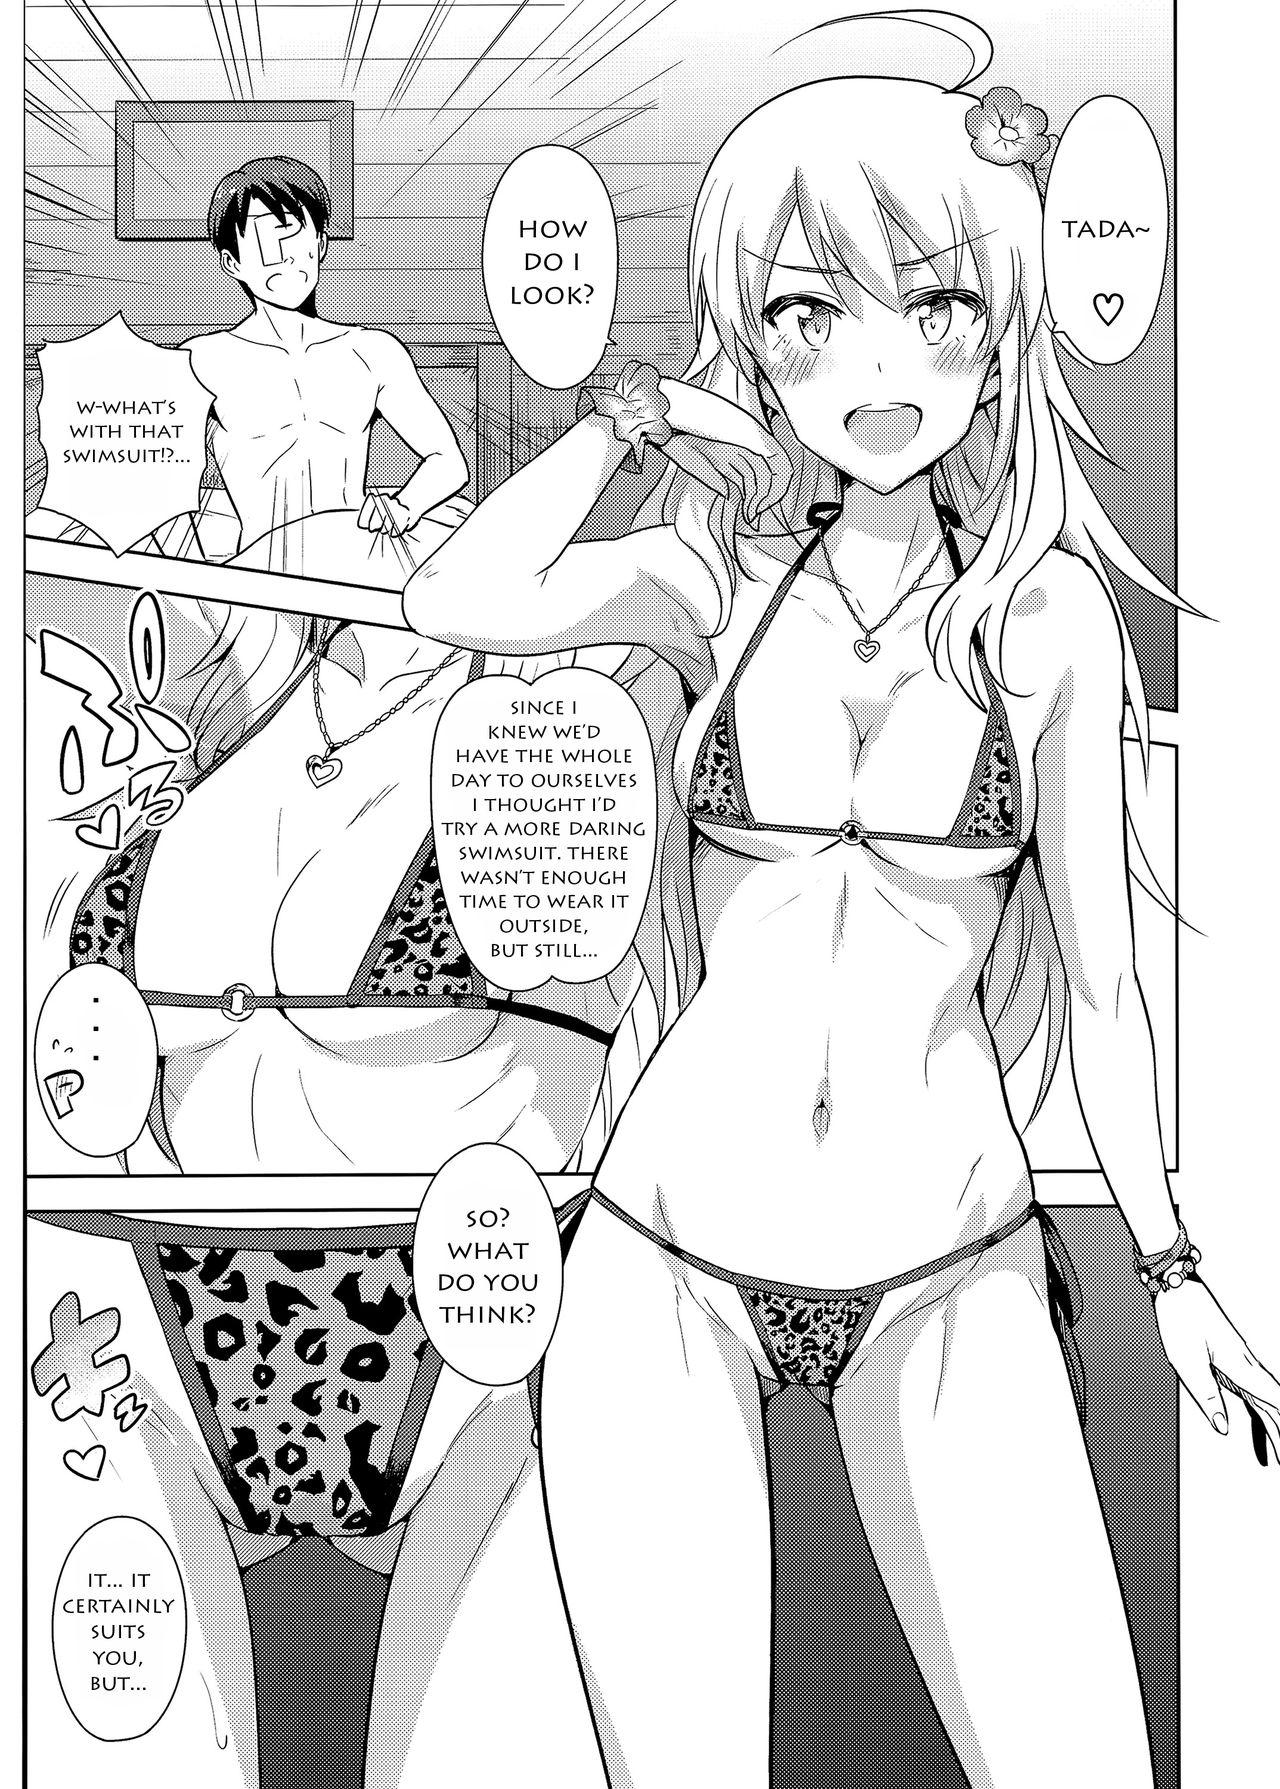 Butts Oshiete MY HONEY 2 Kouhen - The idolmaster Two - Page 4